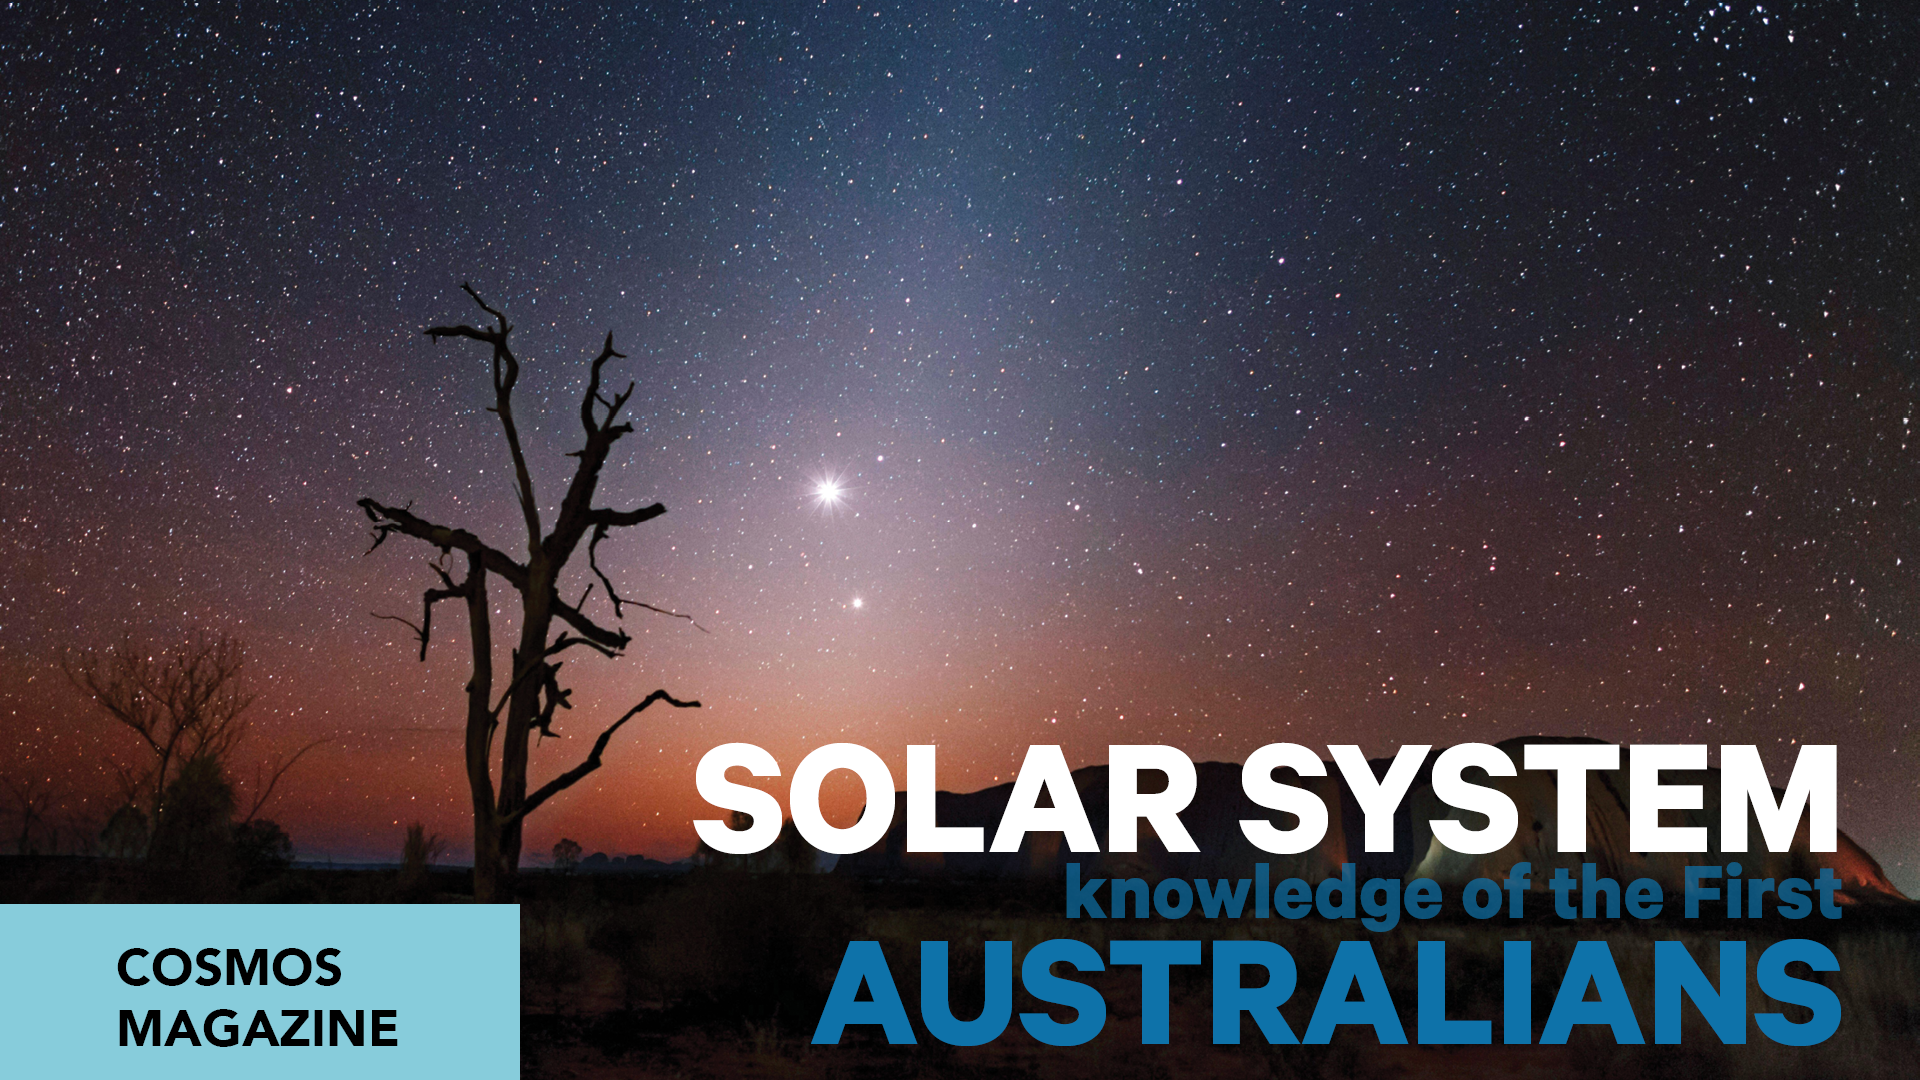 COSMOS MAGAZINE: Solar System Knowledge of the First Australians